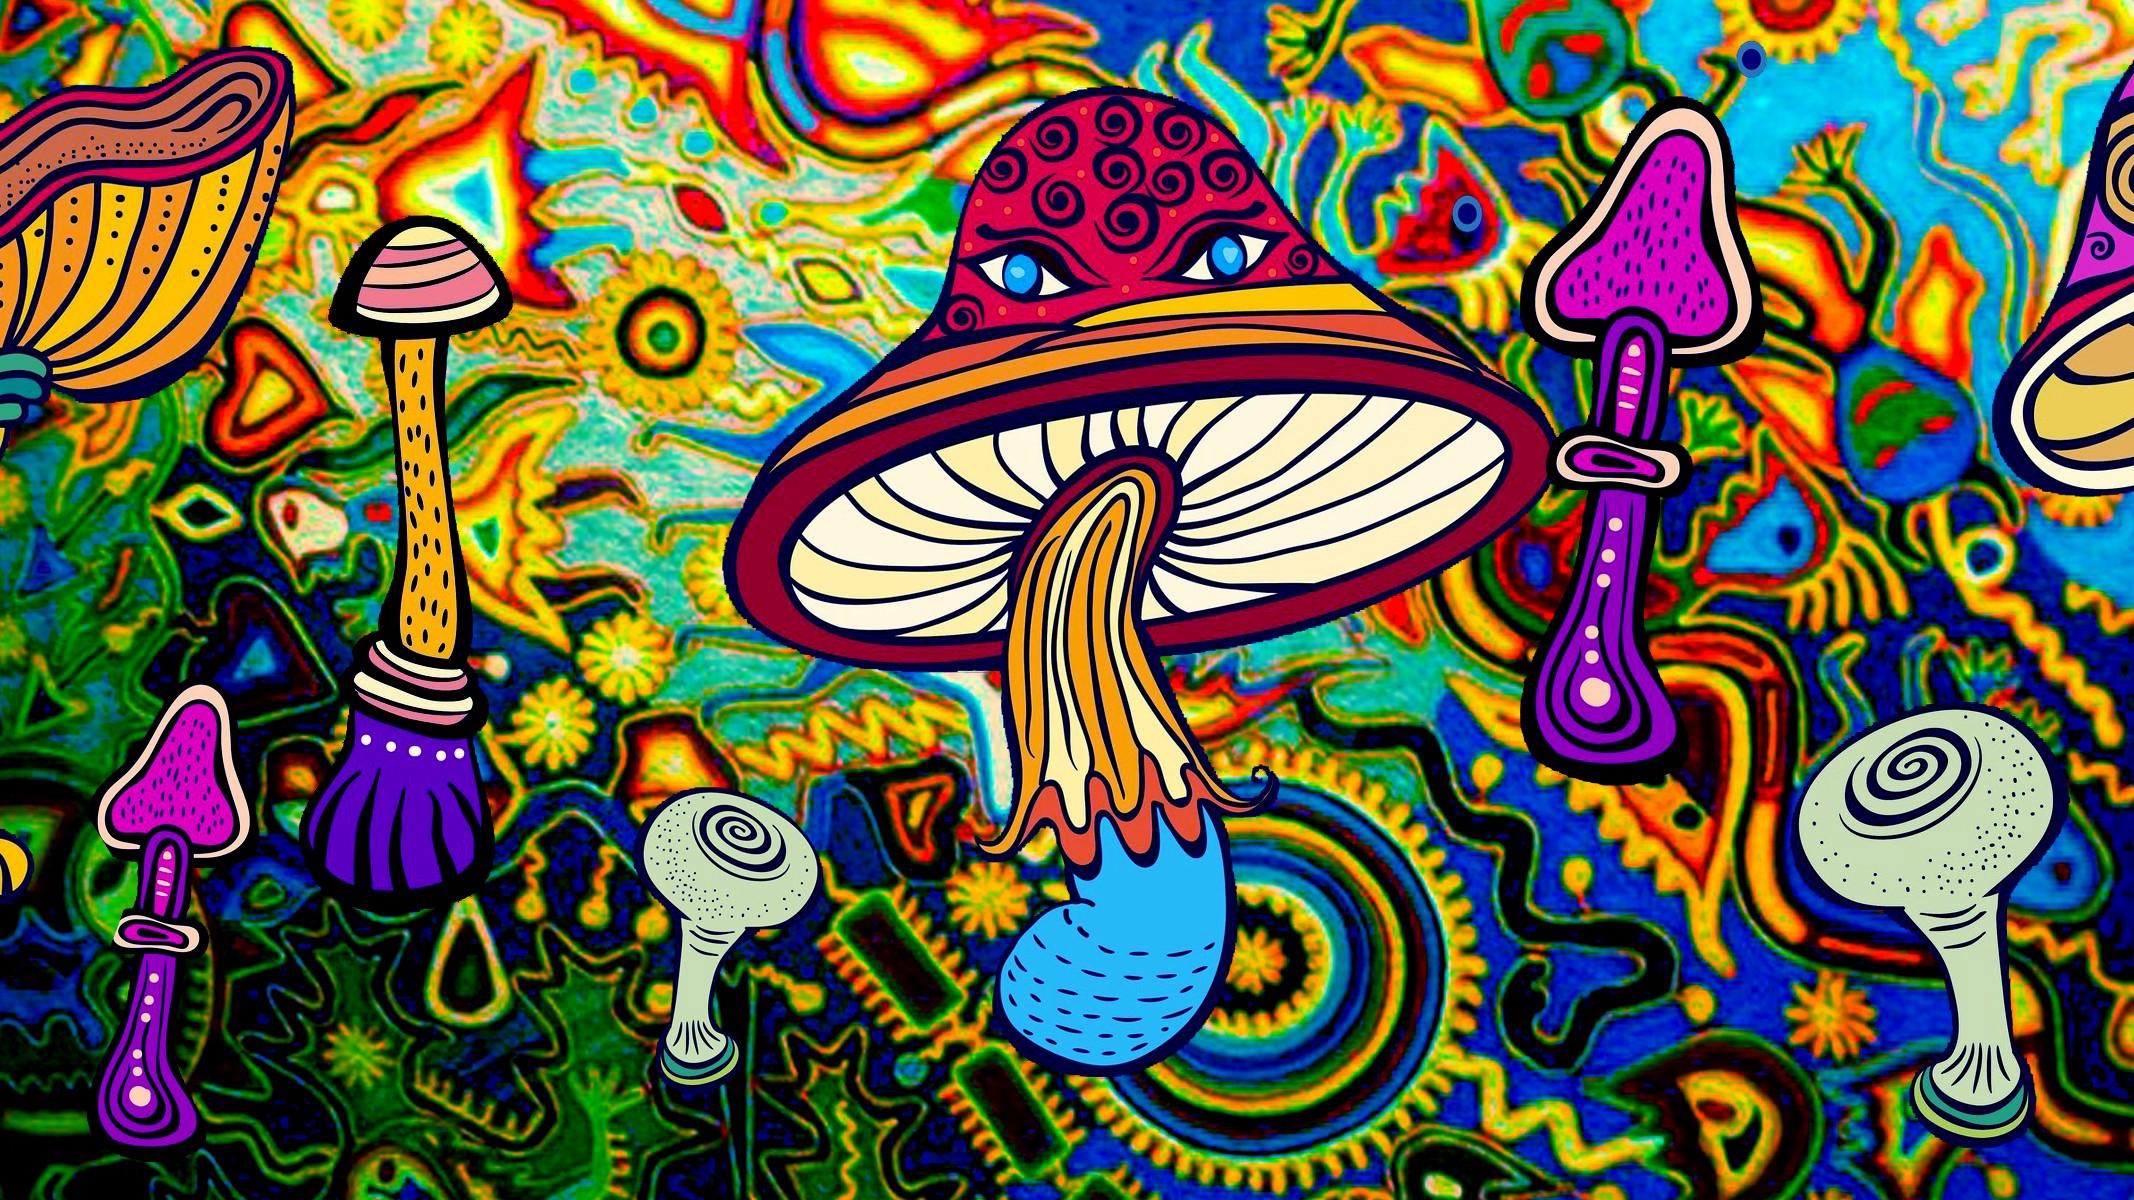 Buy Legal Psychedelic Drugs